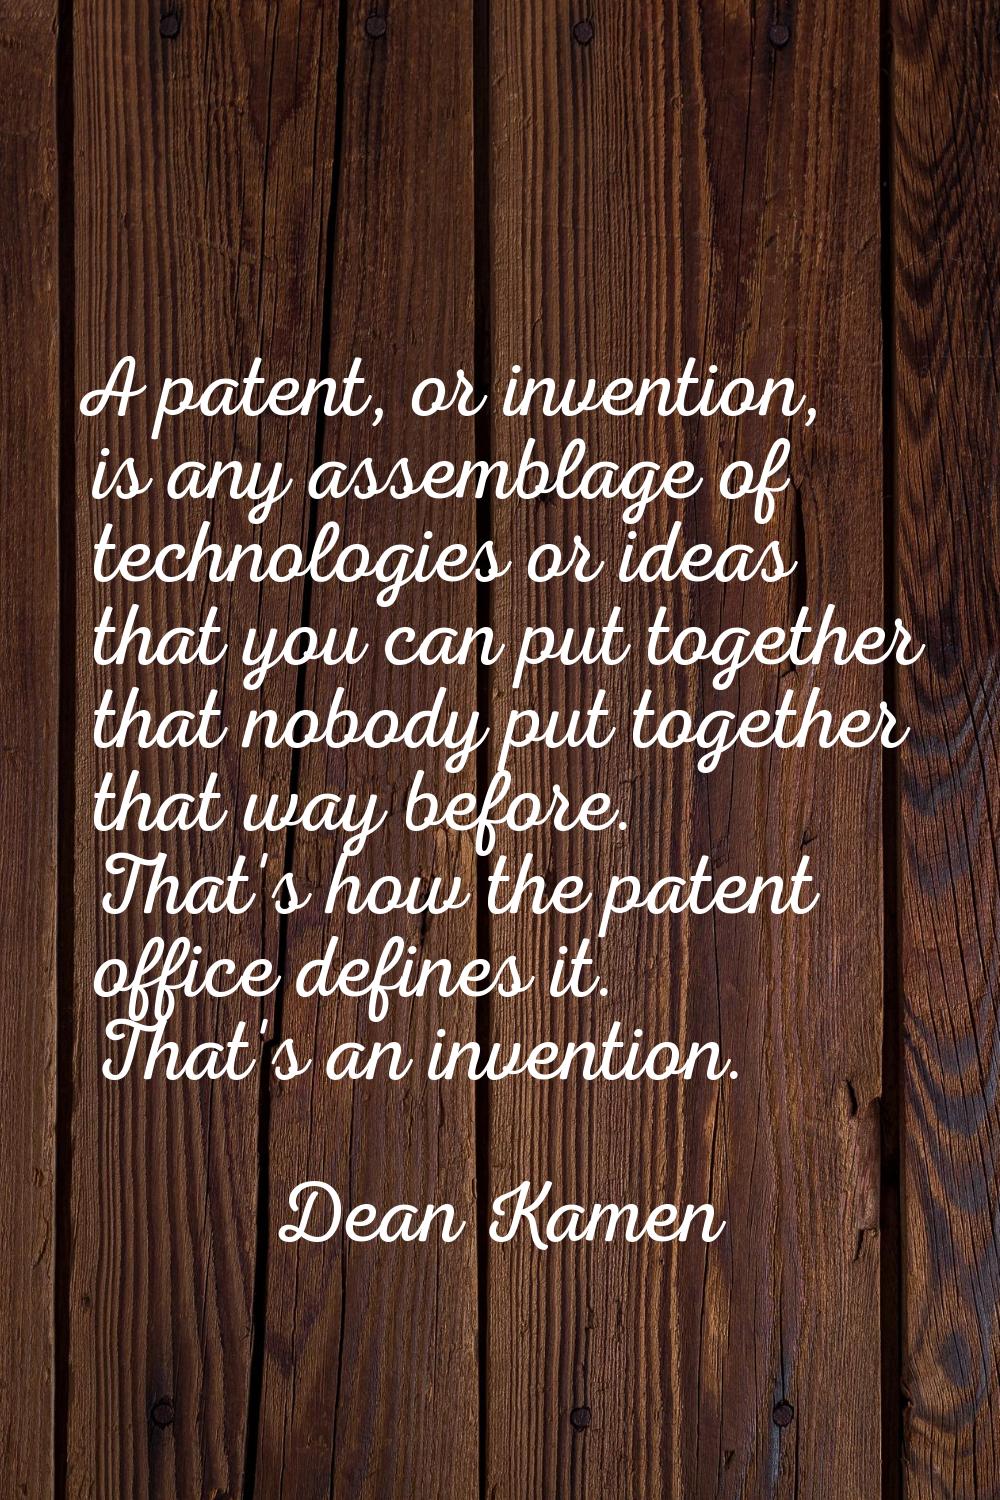 A patent, or invention, is any assemblage of technologies or ideas that you can put together that n